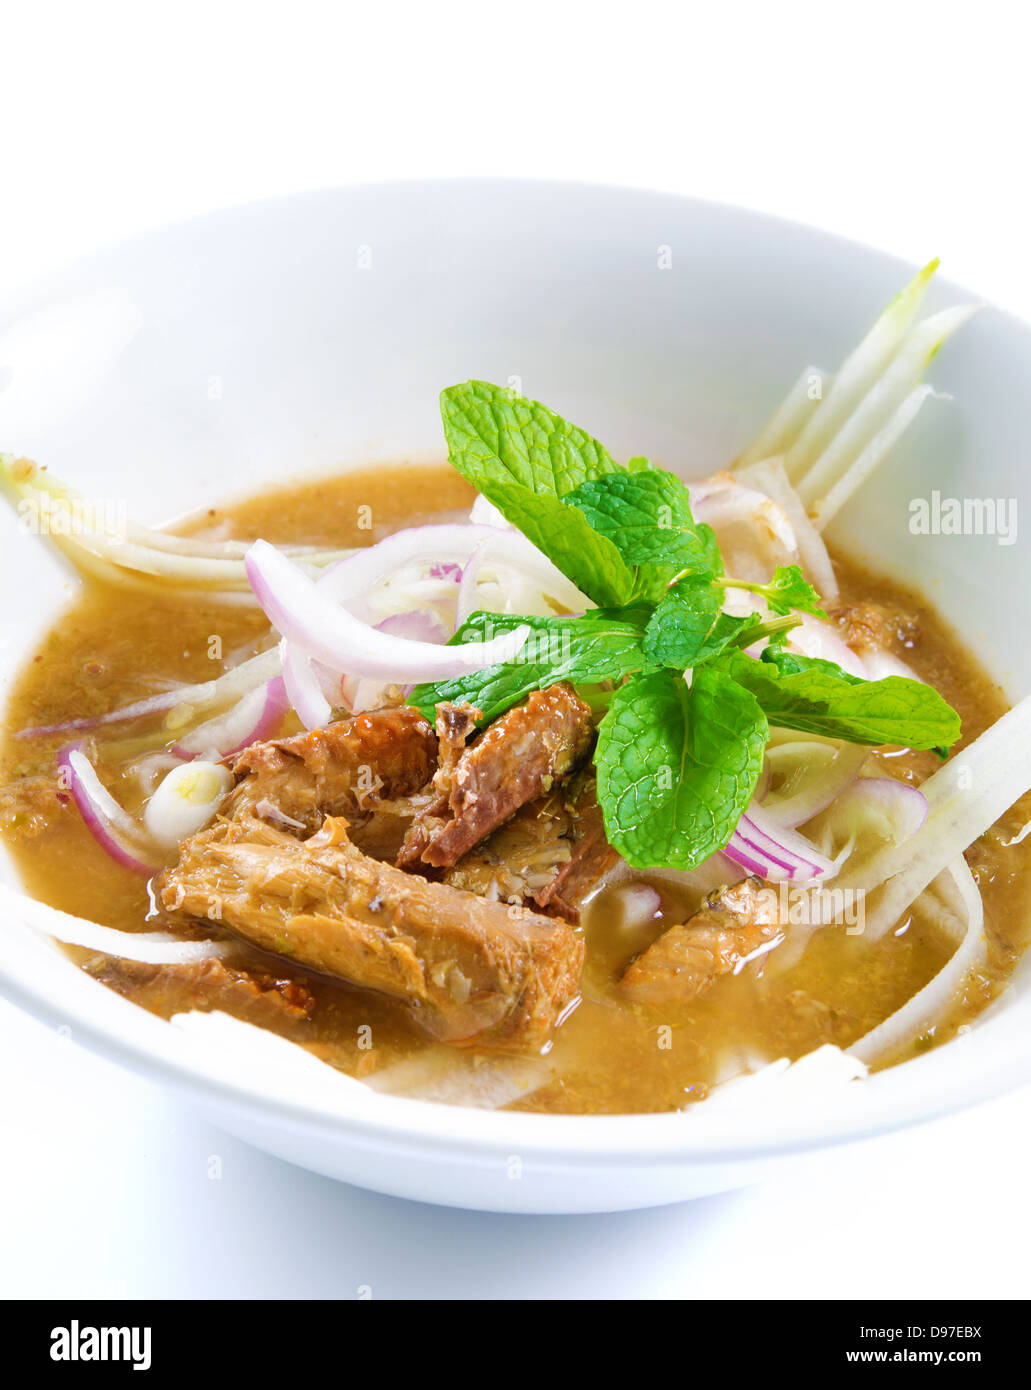 Assam or asam laksa is a sour, fish-based soup. Traditional Malay dish, malaysian food, Asian cuisine. Stock Photo